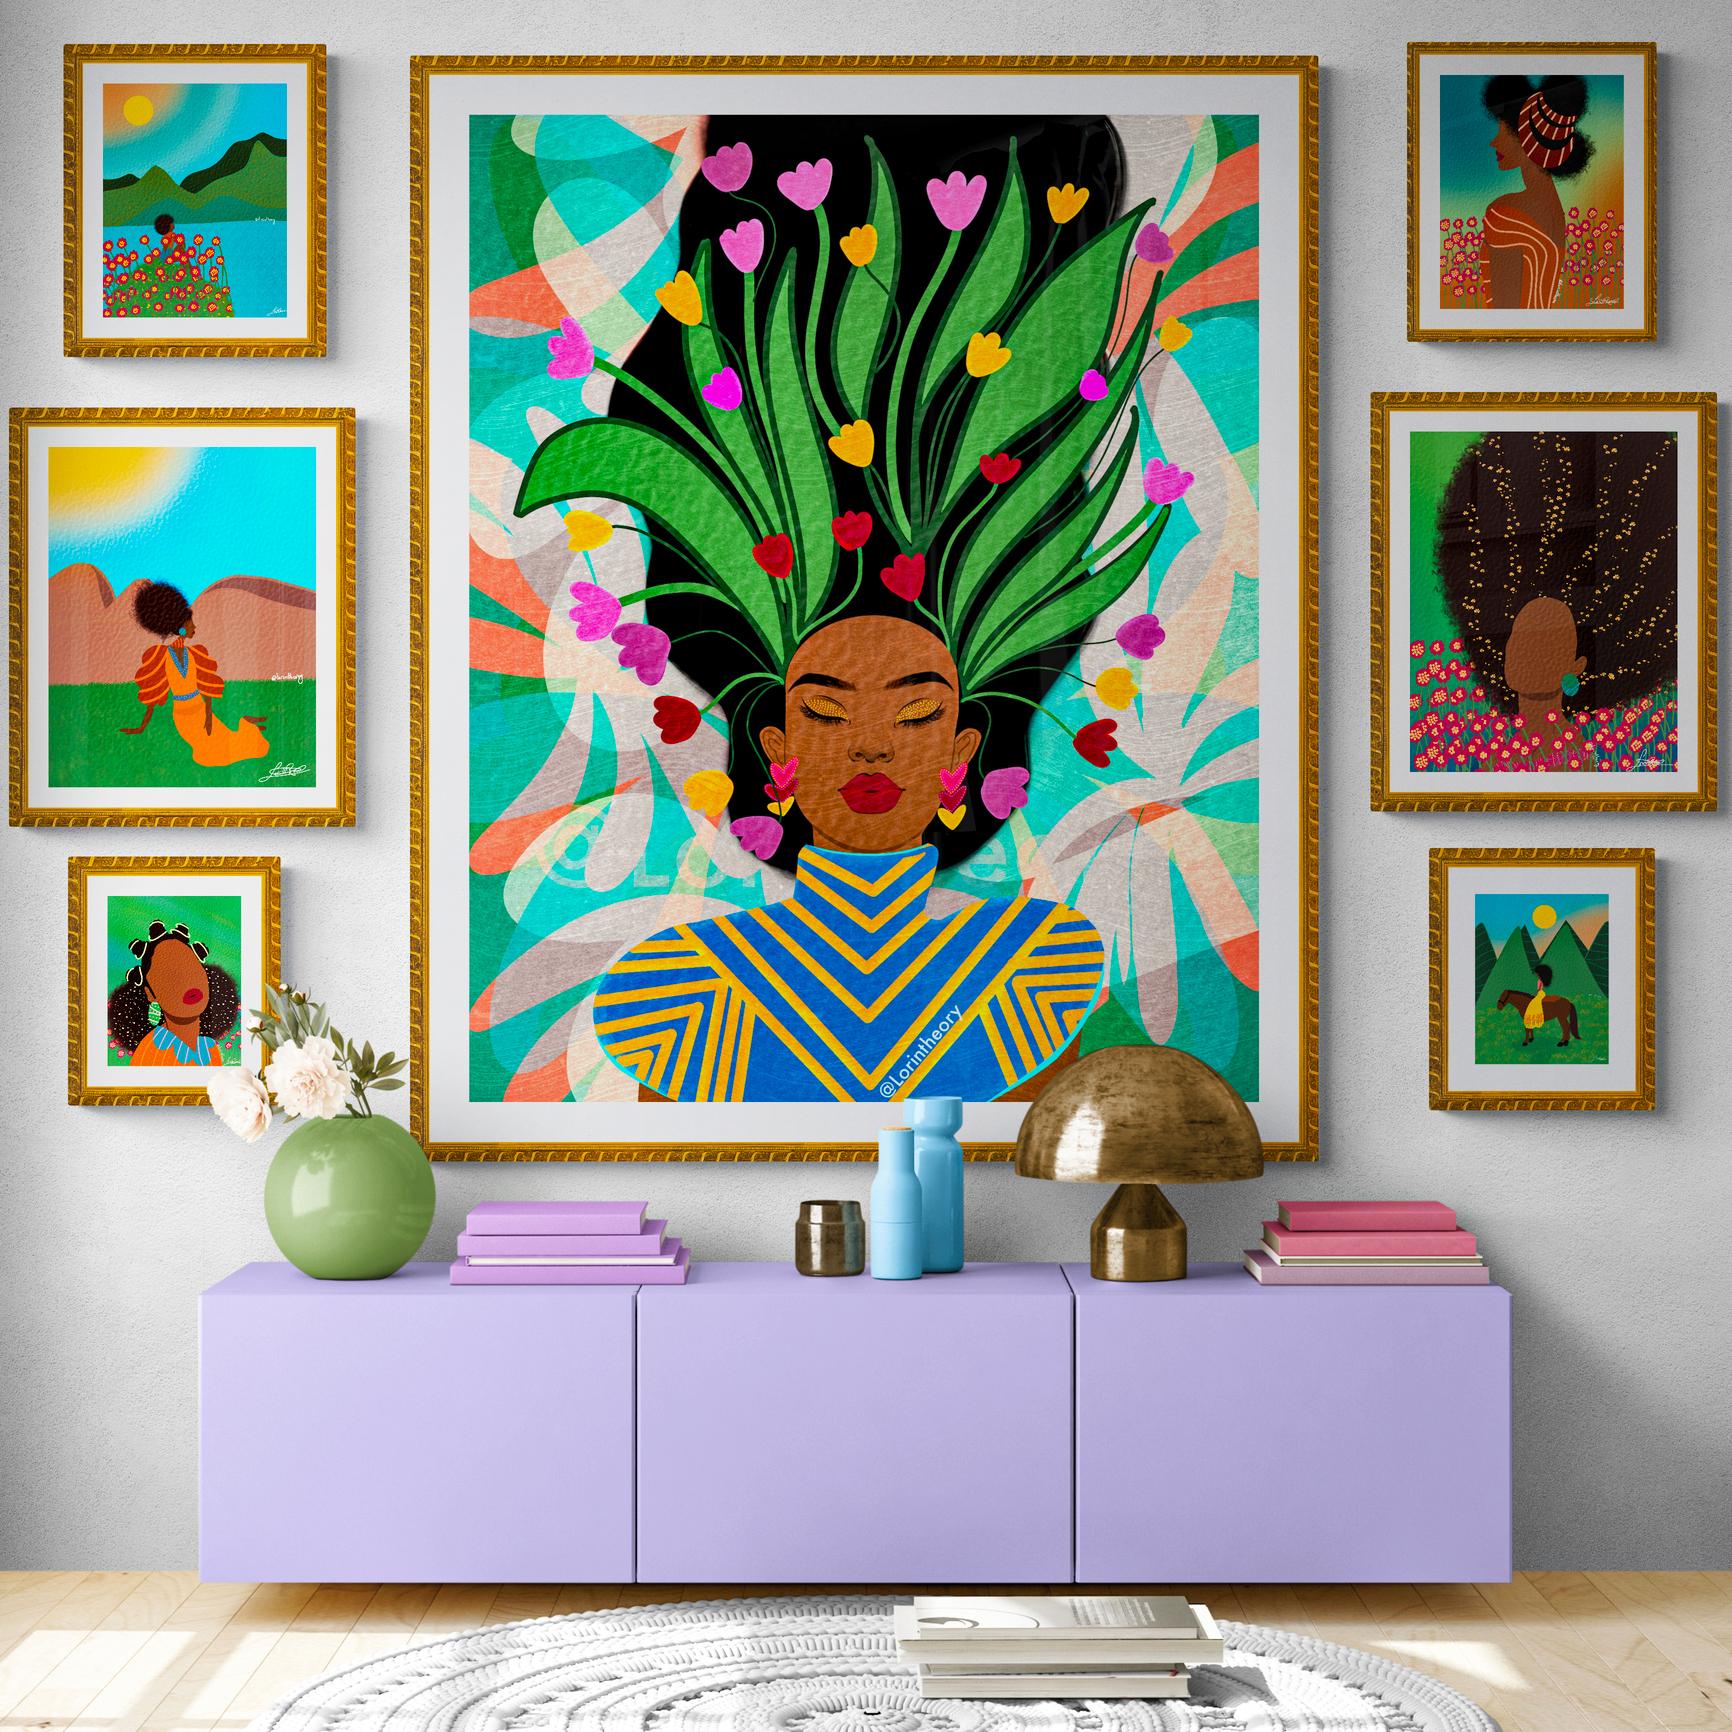 colorful wall art afro art african american artwork african artwork paintings african american art for wall african-american wall art black art black artwork black artwork paintings colorful art colorful art wall colorful art paintings